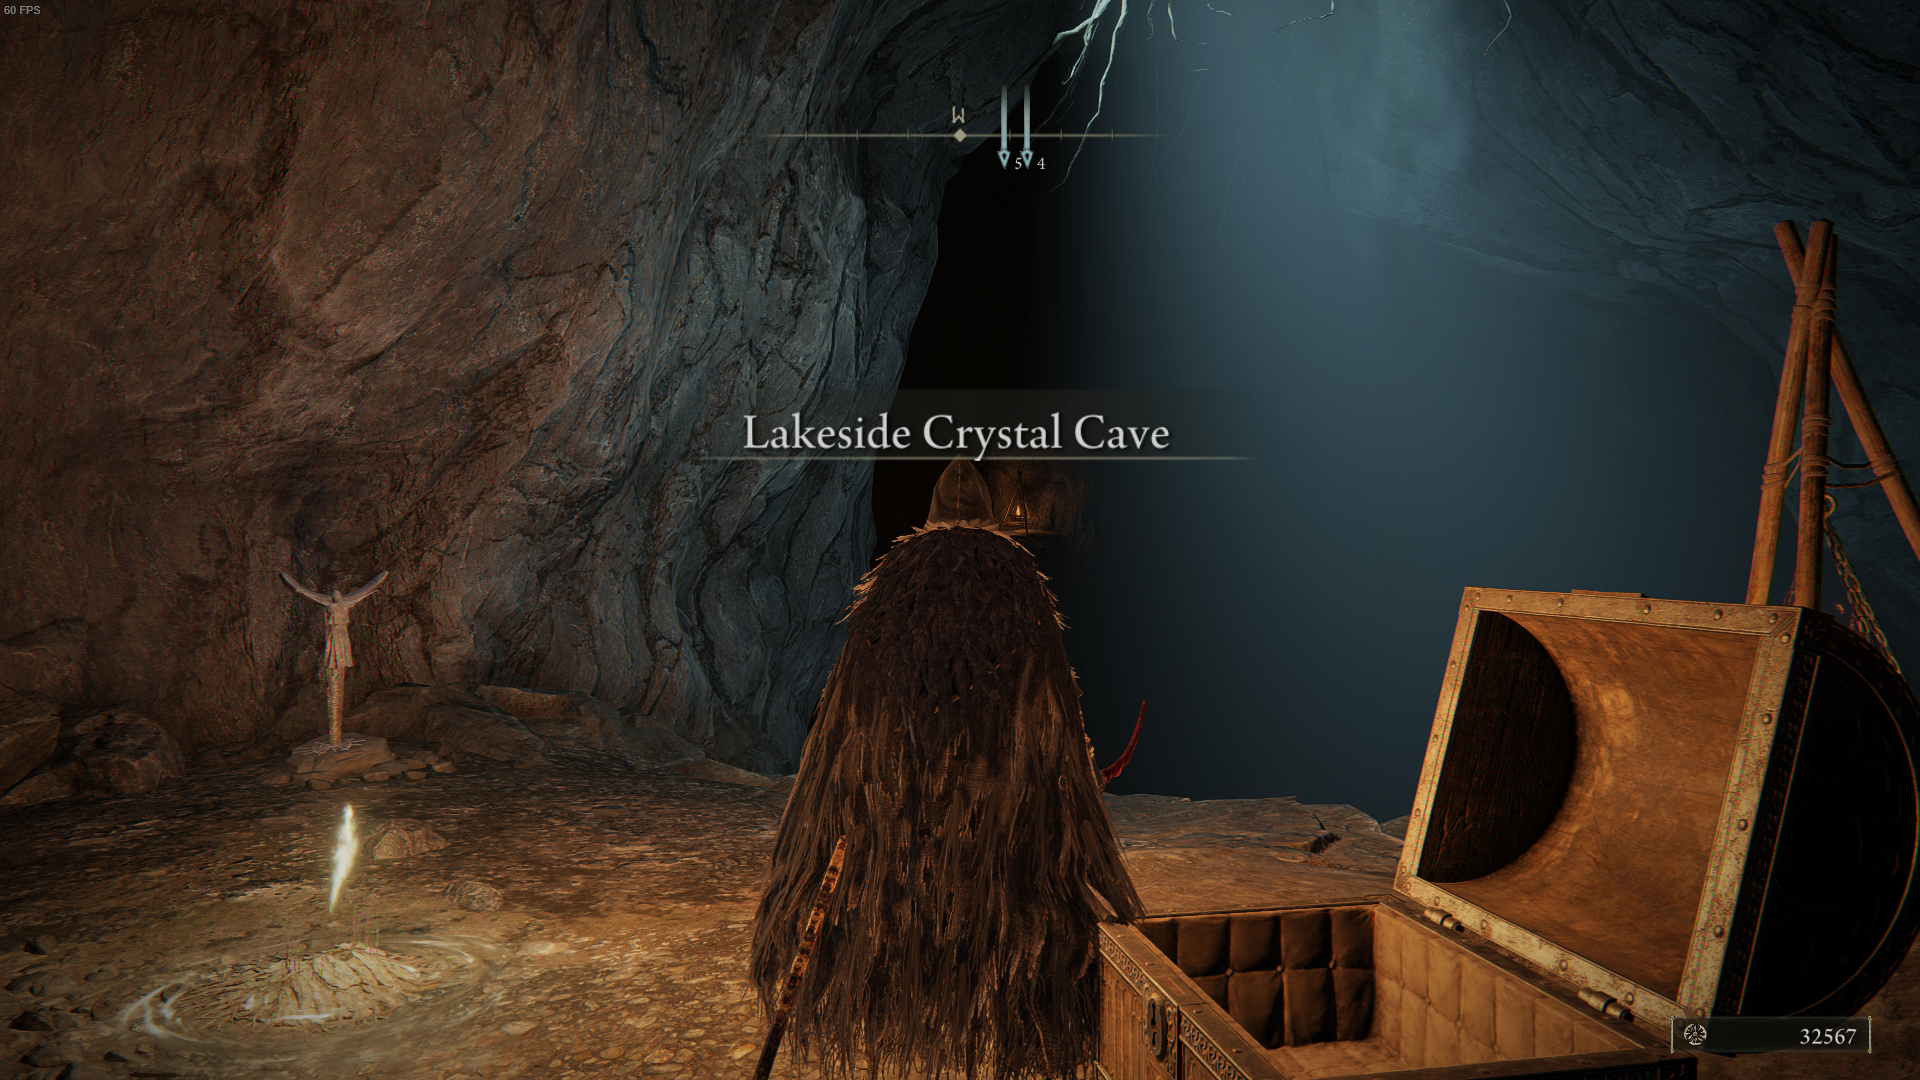 Elden Ring Lakeside Crystal Cave Guide How to Beat the Bloodhound